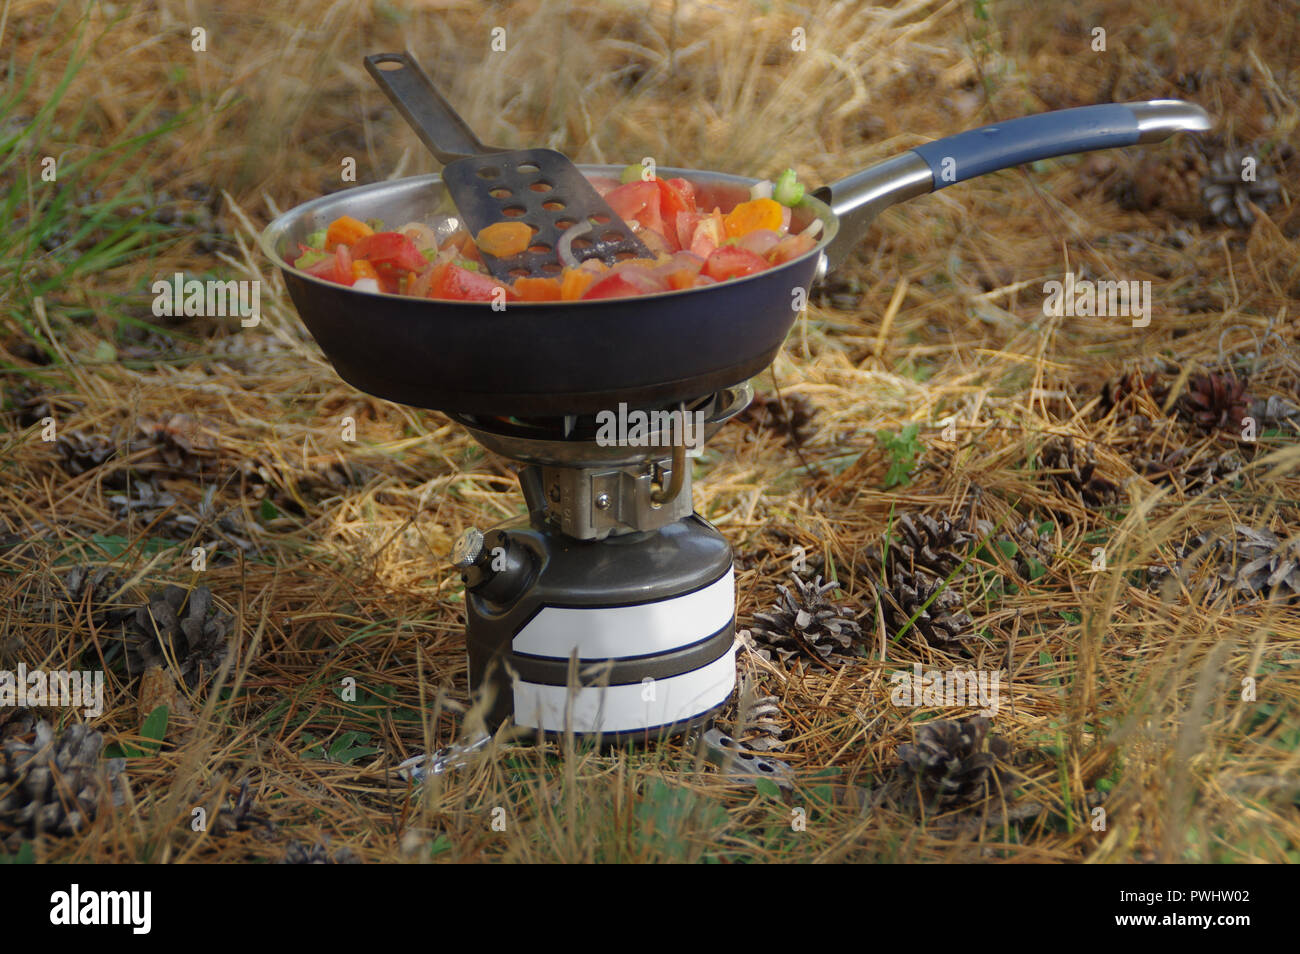 Hot meal on pan on the survival stove. Camp cooking. Stock Photo